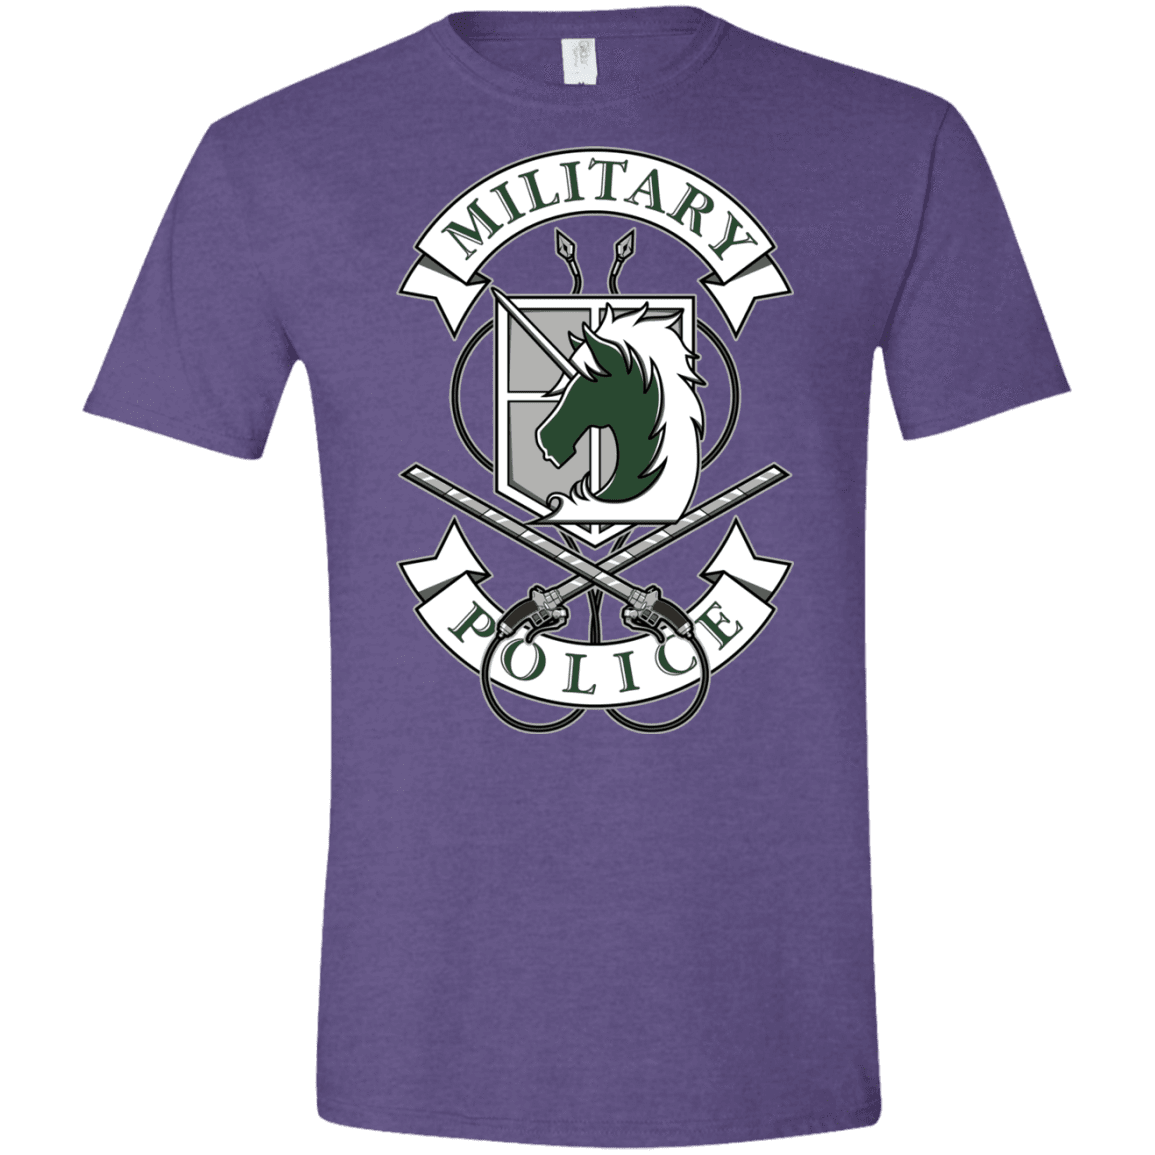 T-Shirts Heather Purple / S AoT Military Police Men's Semi-Fitted Softstyle